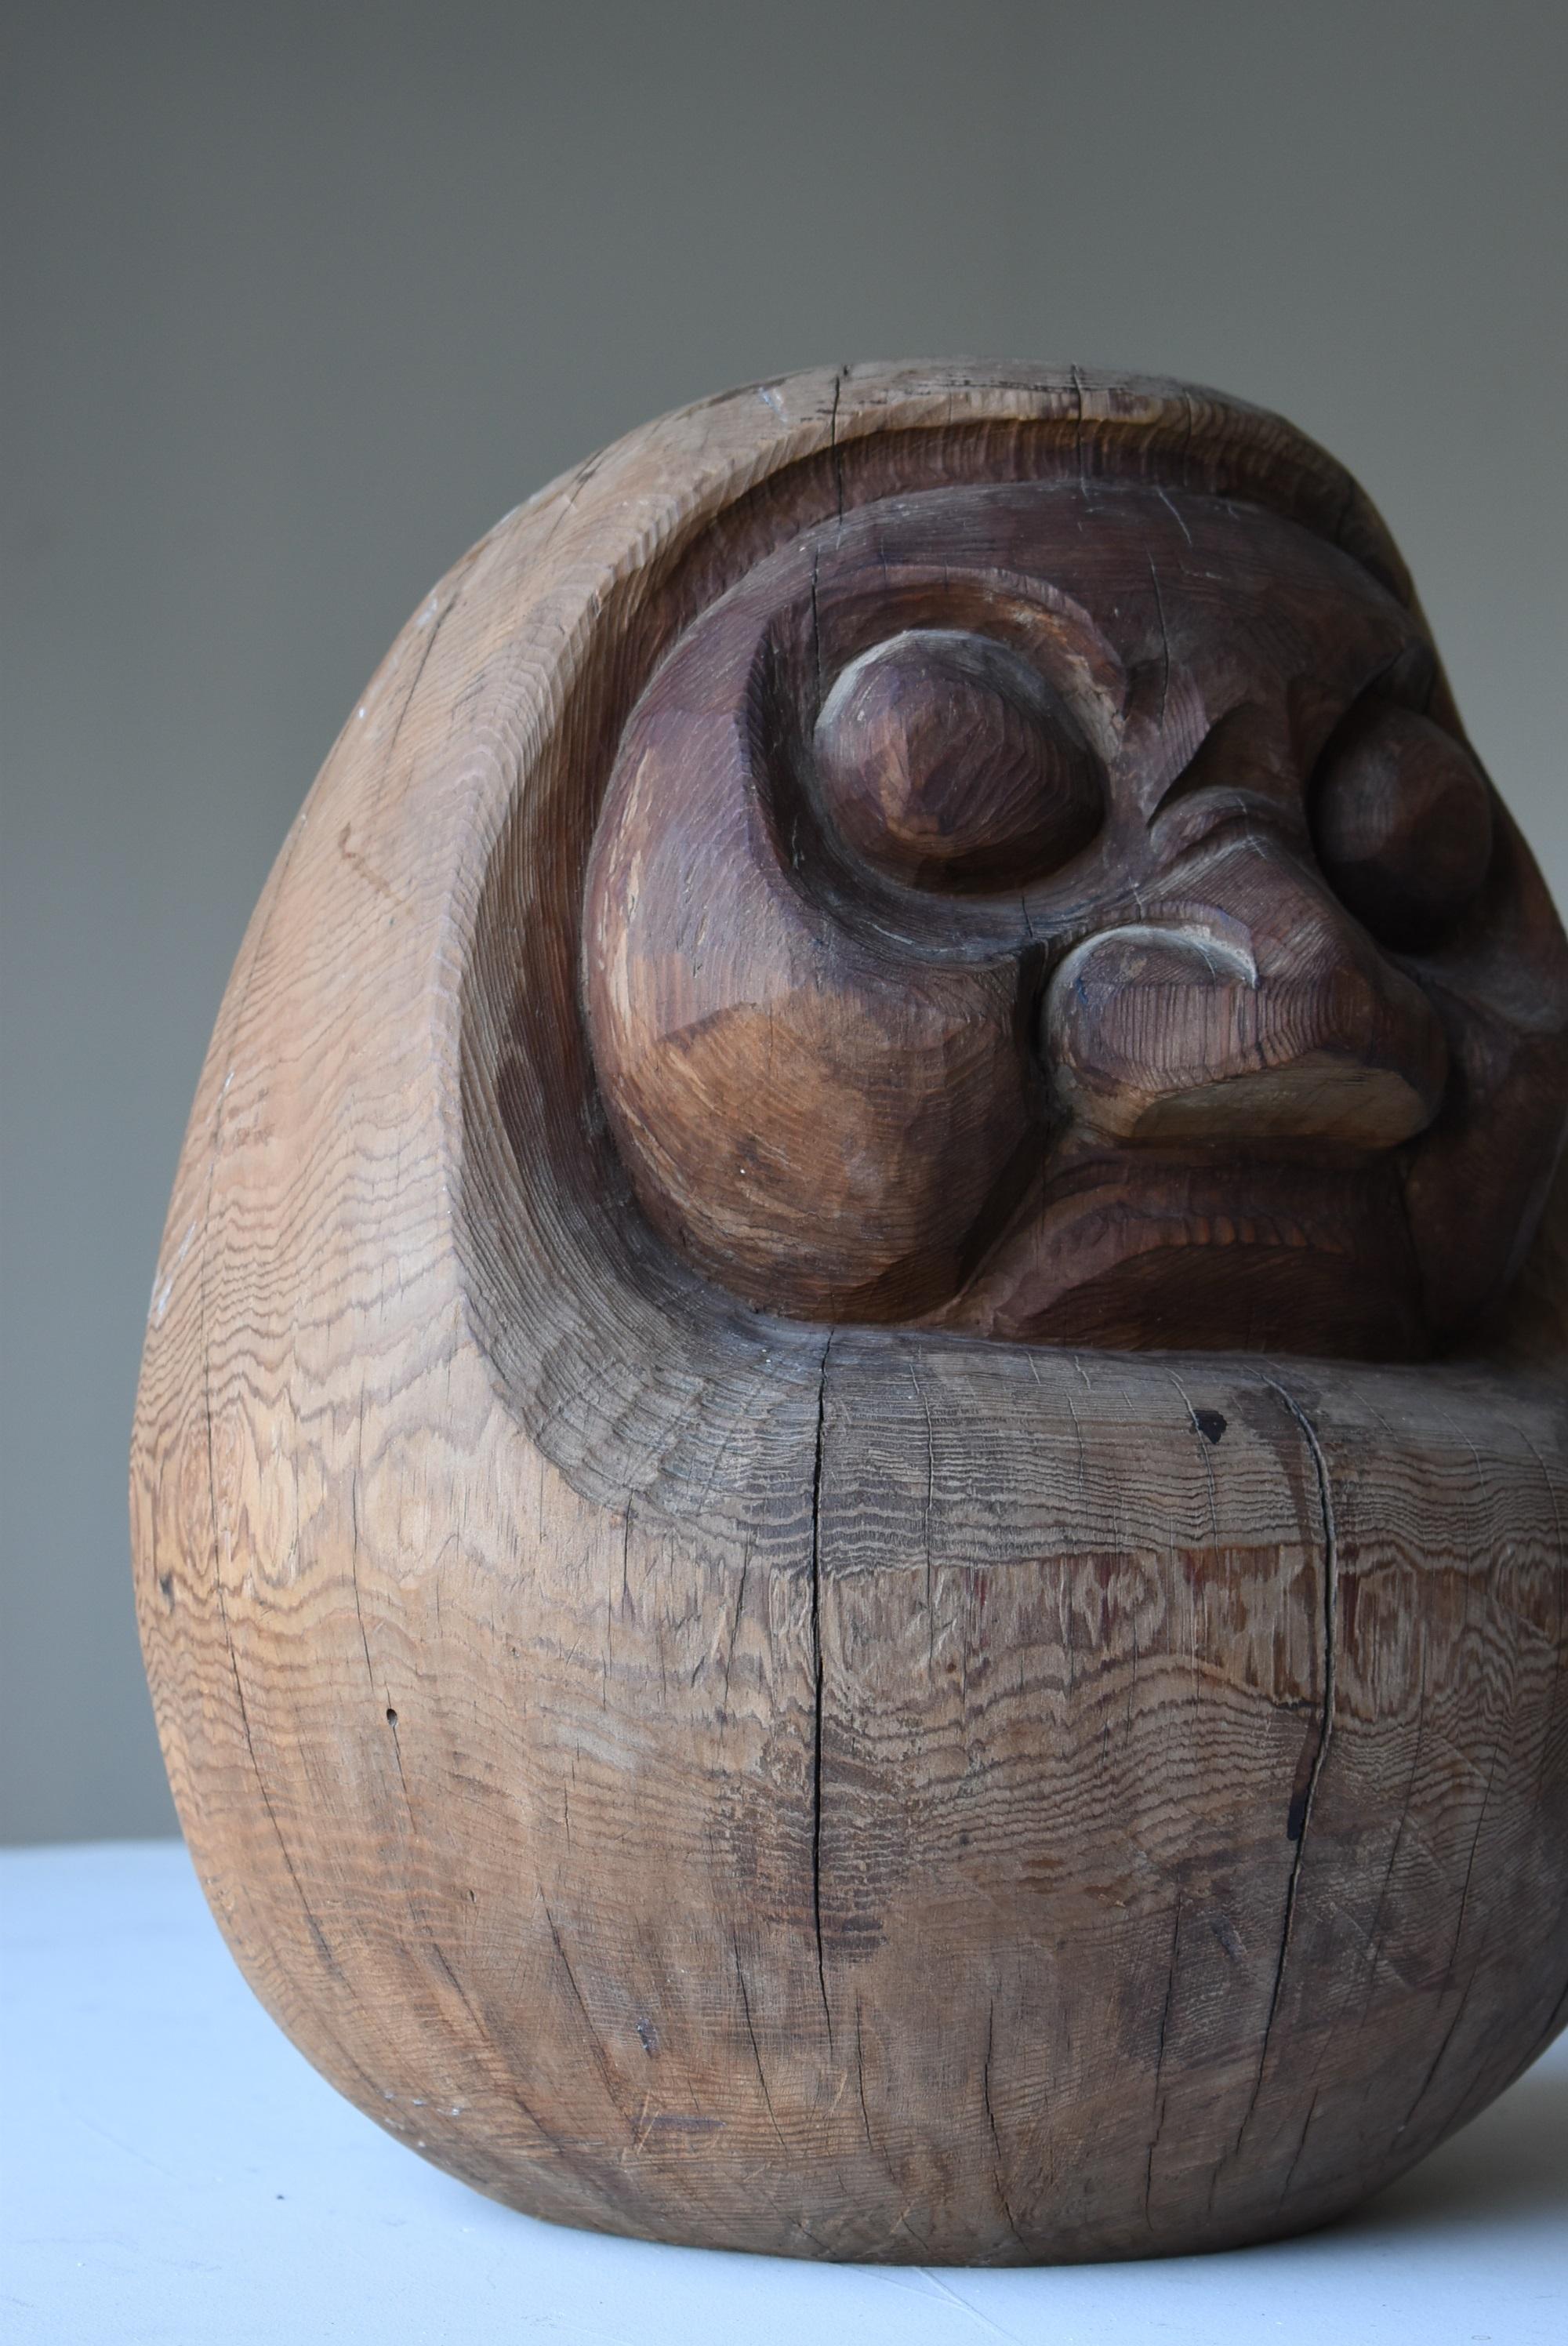 It is a Japanese wood carving daruma.
It is from the Edo period (1800-1900).
The material is cedar.

I have a strong expression.
The taste is also wonderful.
The size is large and it has an overwhelming presence.

This is a Japanese folk